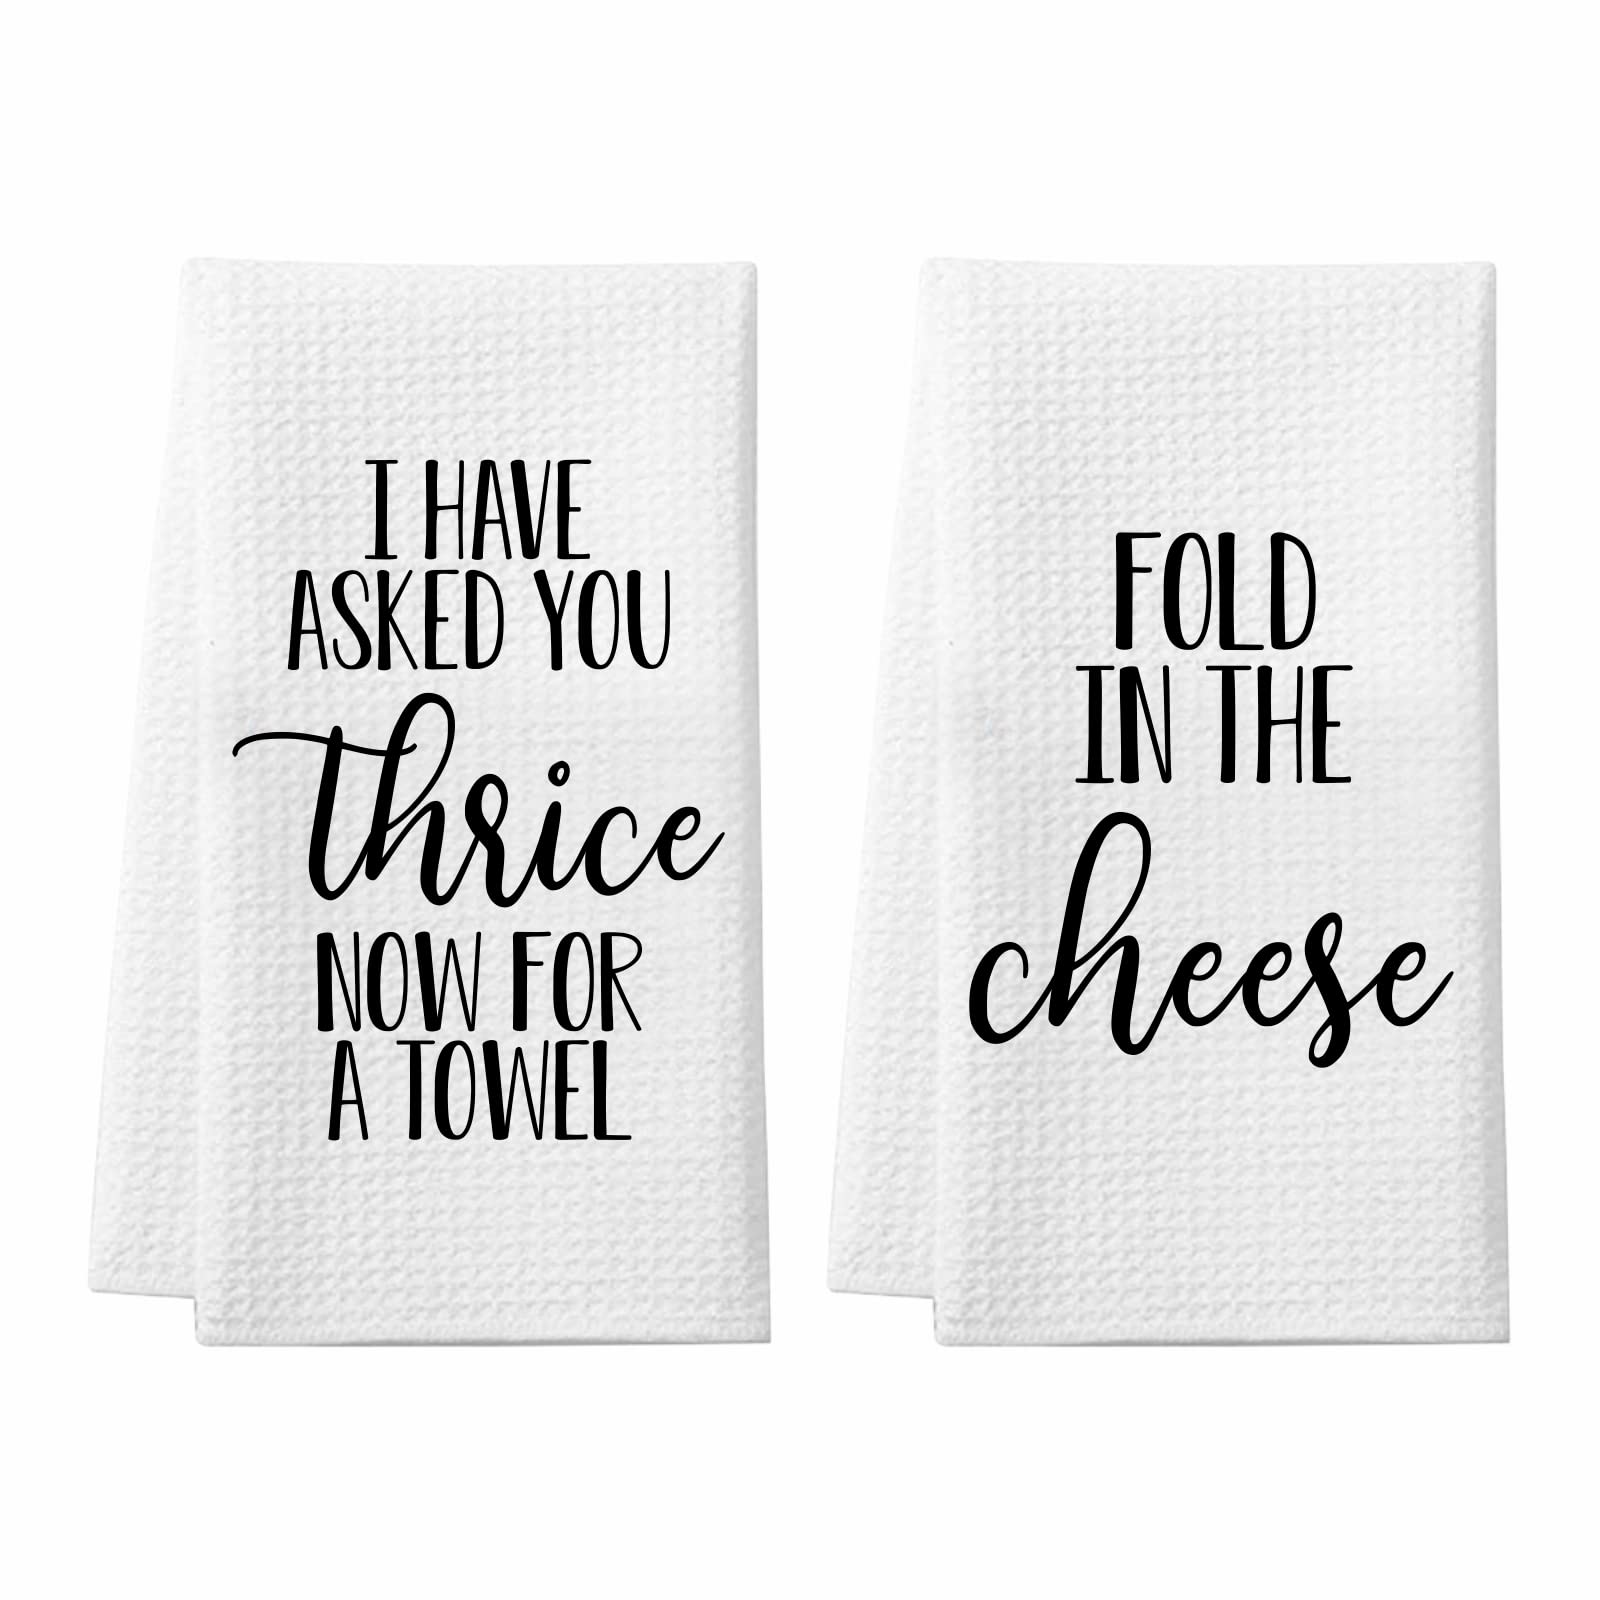 Saukore Fold in The Cheese Kitchen Towels, 2 Pack Waffle Weave Dish Towels TV Show Merchandise Gift, Funny Bathroom Hand Towels, Birthday Christmas Housewarming Gifts for SC Fans